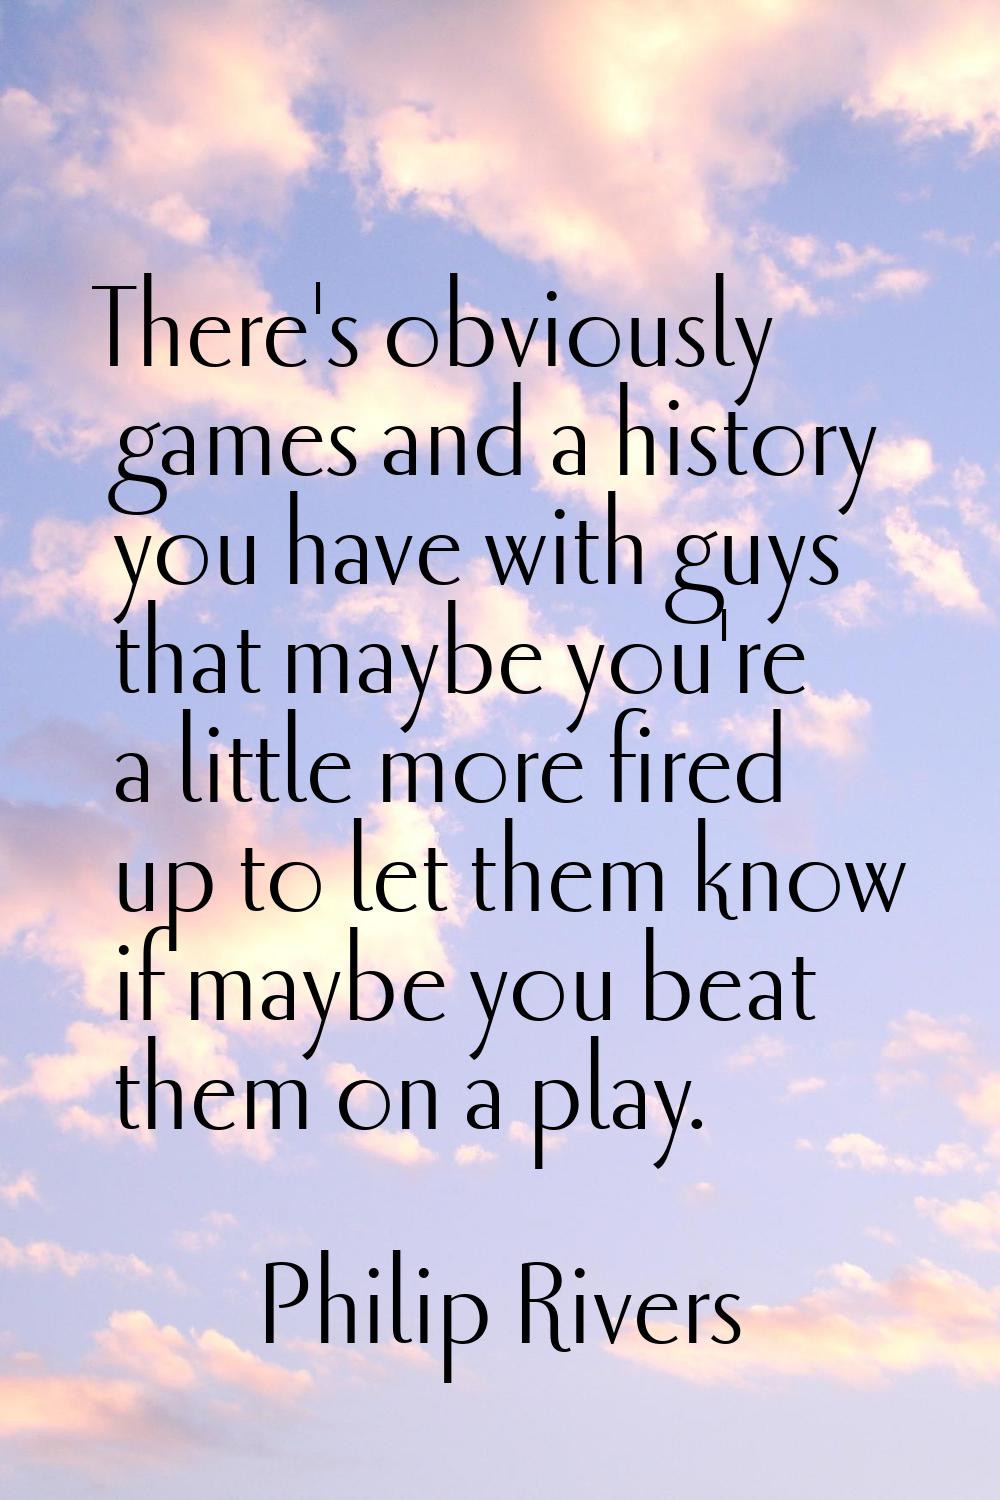 There's obviously games and a history you have with guys that maybe you're a little more fired up t